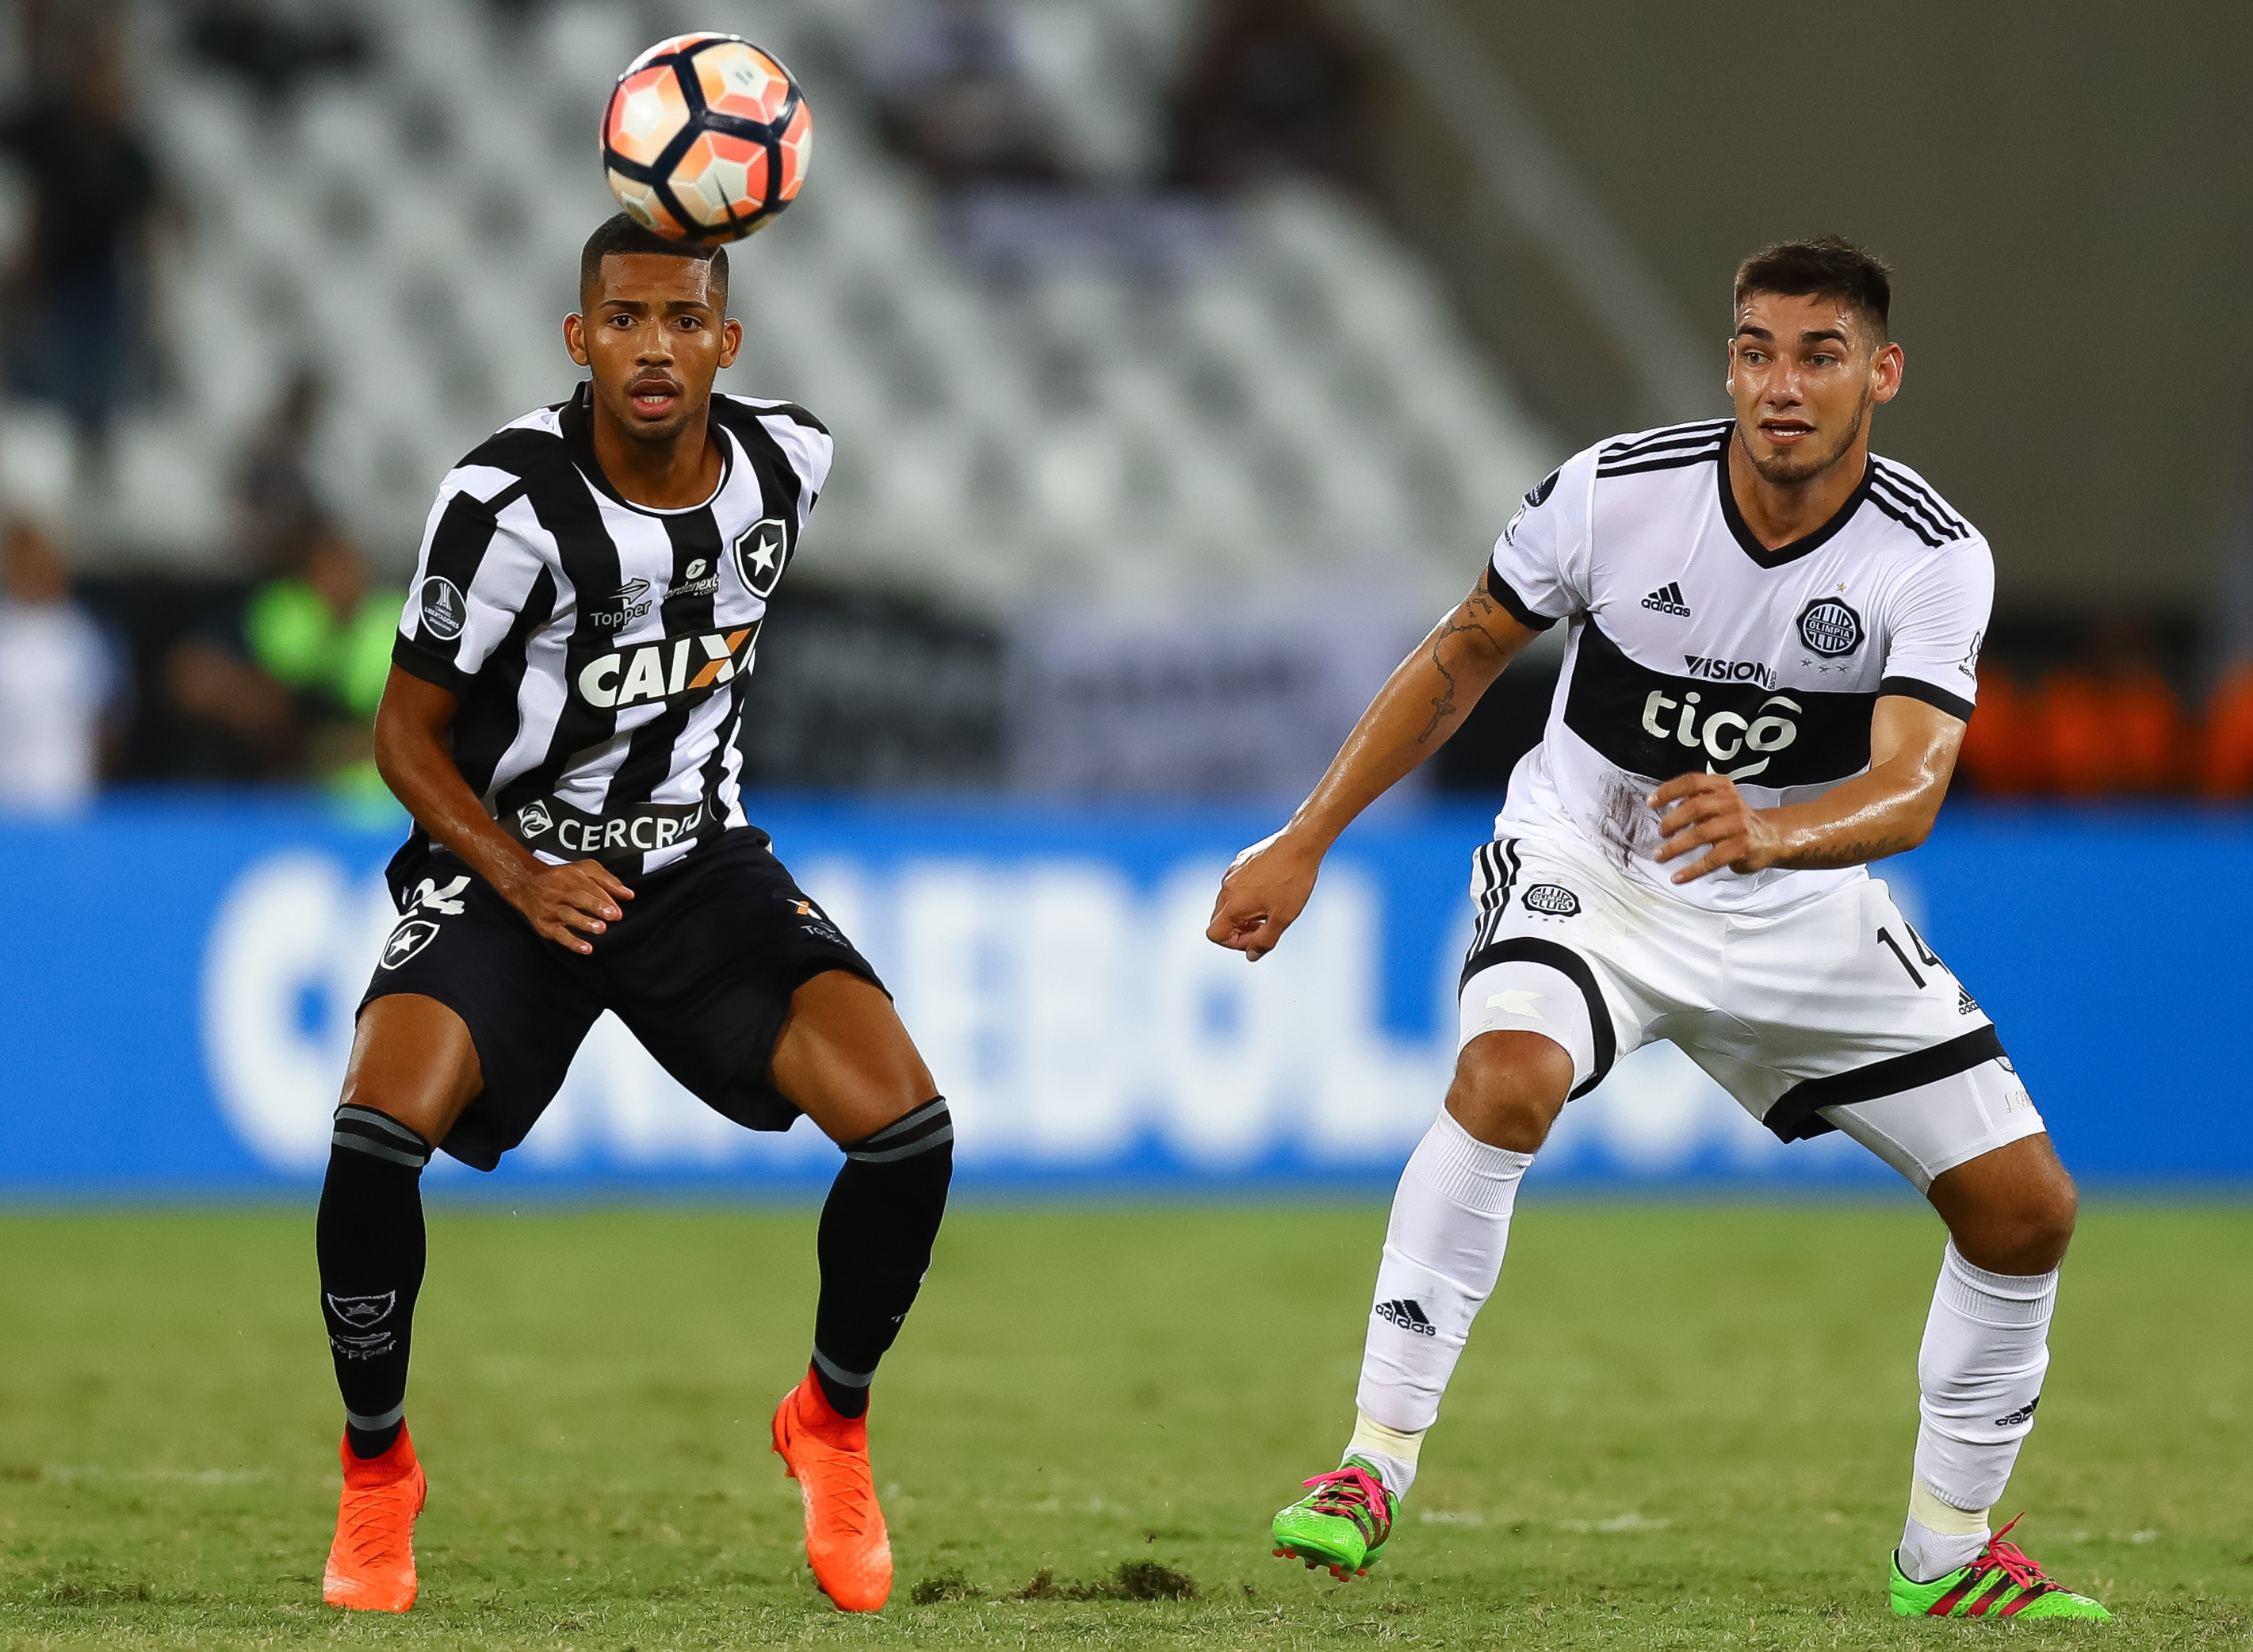 RIO DE JANEIRO, BRAZIL - FEBRUARY 15: Matheus Fernandes (L) of Botafogo struggles for the ball with Jose Canete of Olimpia during a match between Botafogo and Olimpia as part of Copa Bridgestone Libertadores at Engenhao Stadium on February 15, 2017 in Rio de Janeiro, Brazil. (Photo by Buda Mendes/Getty Images)